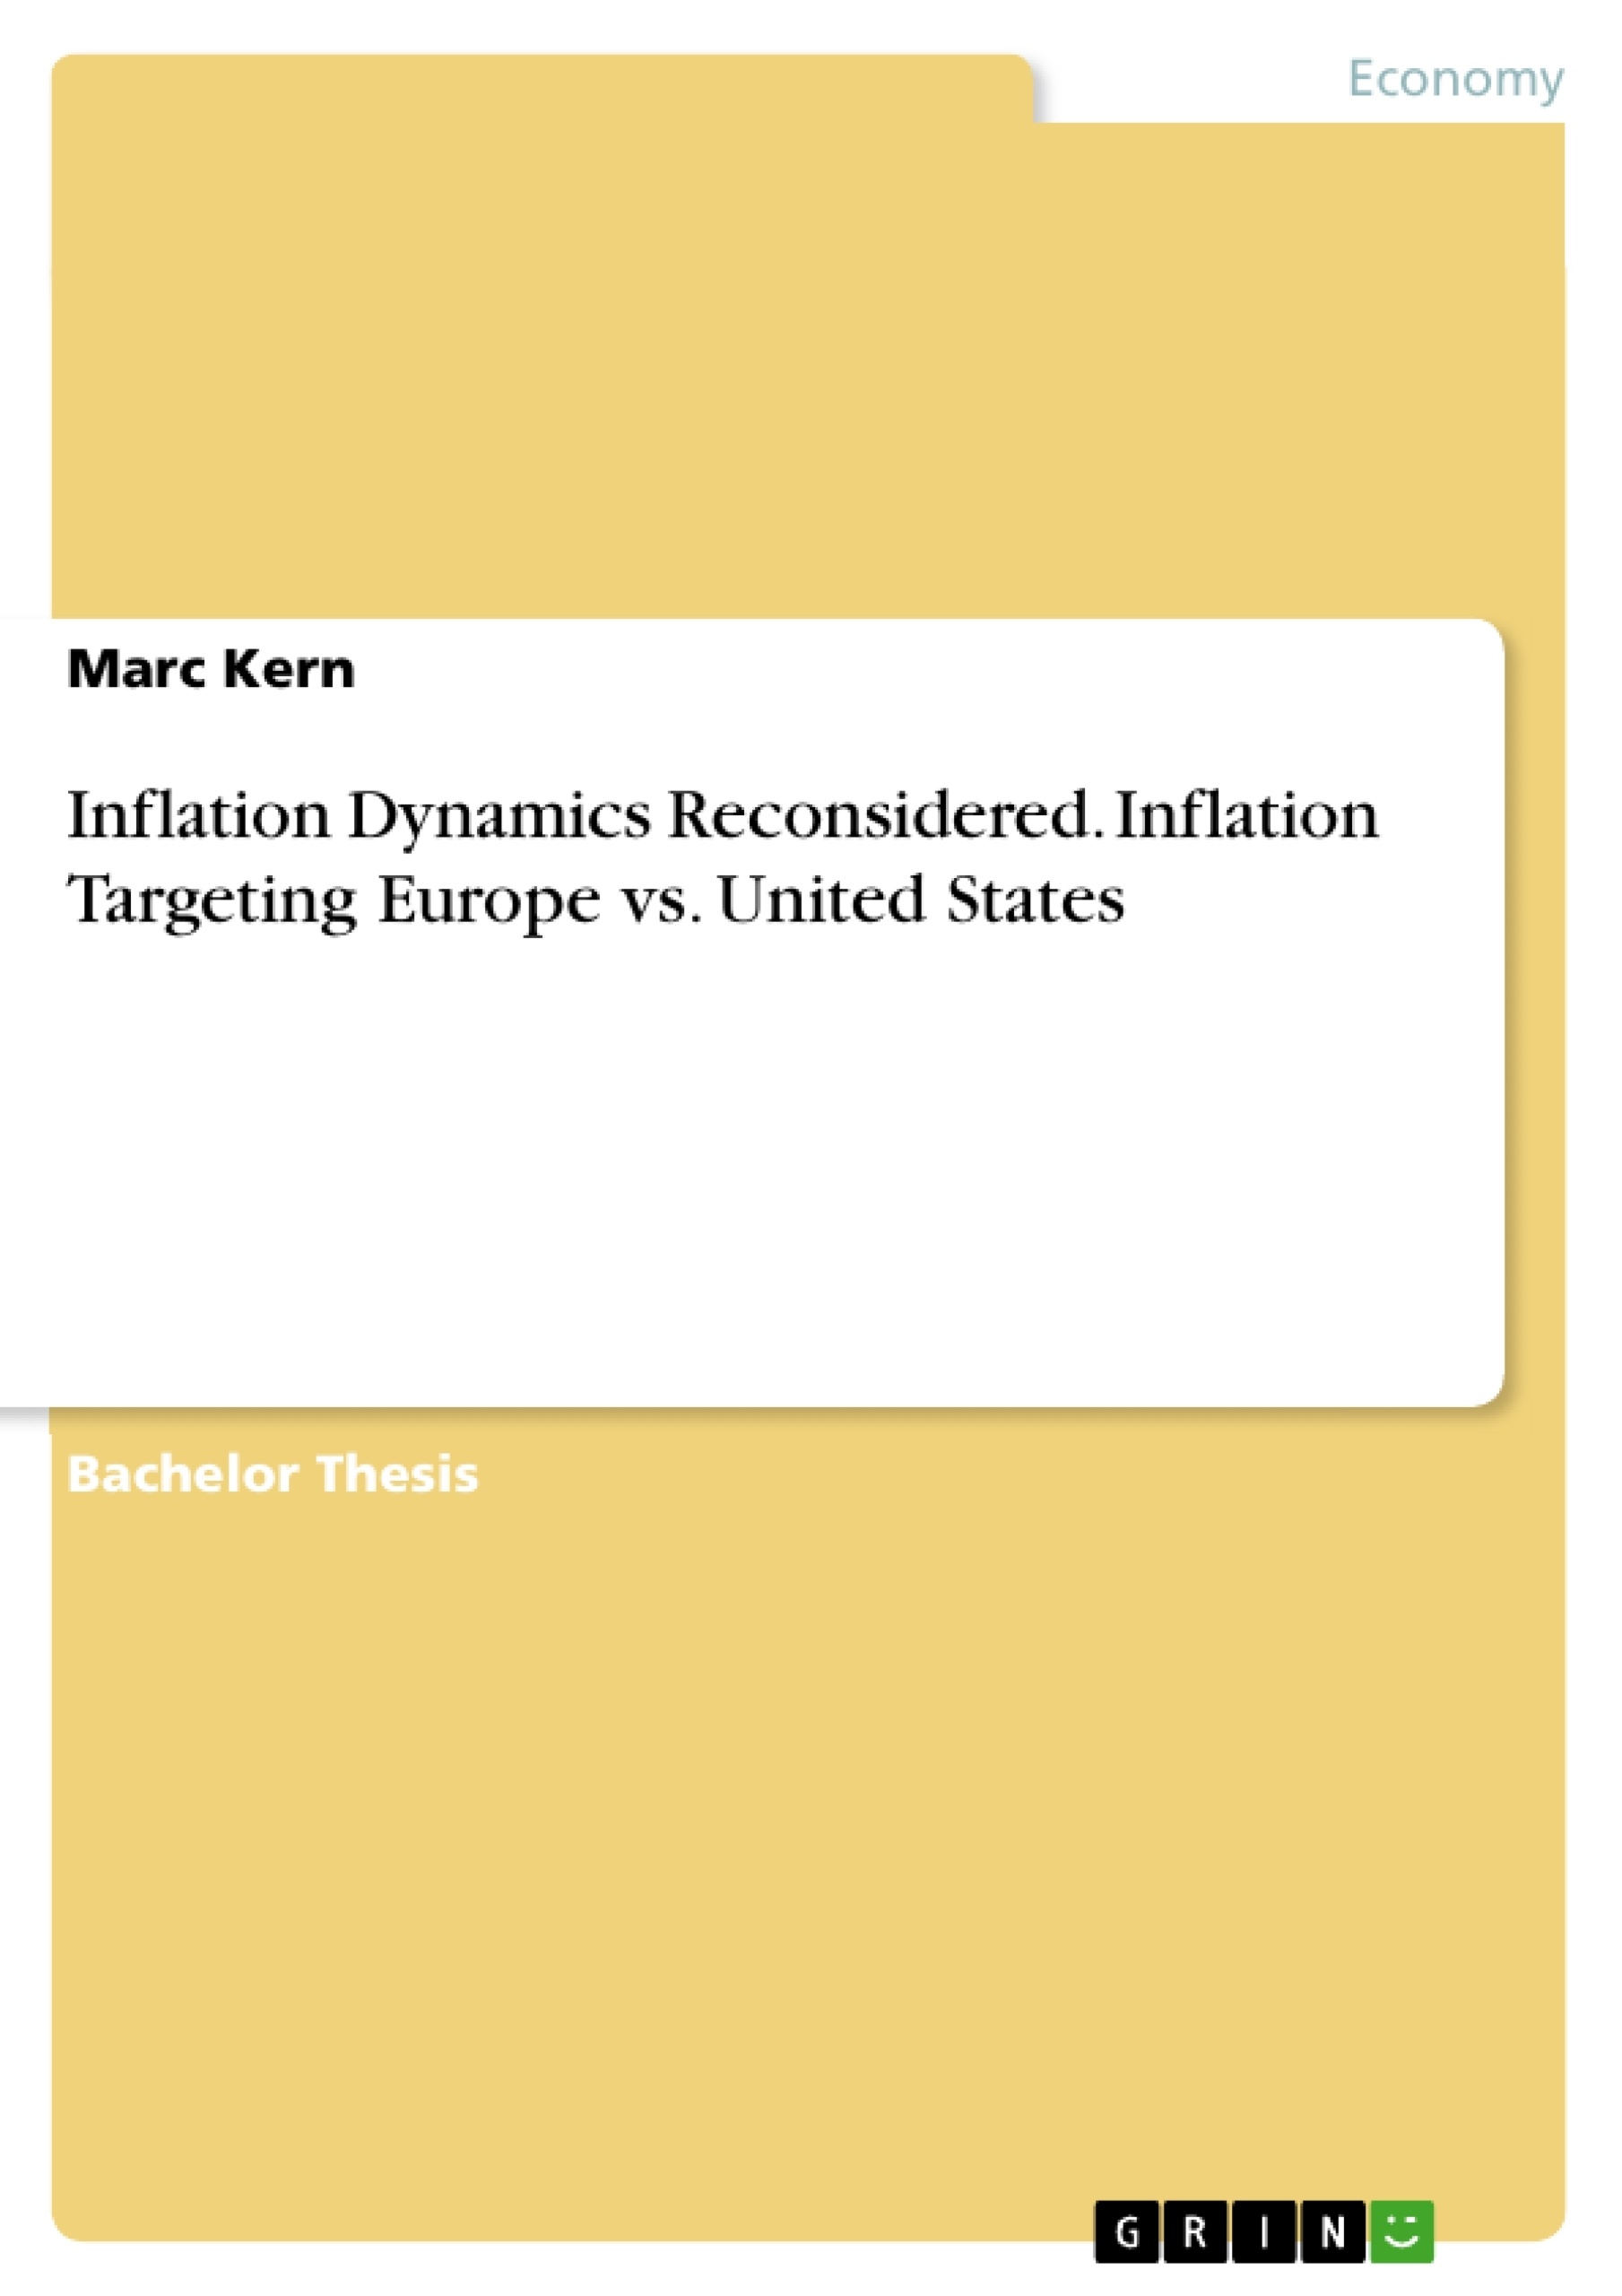 Título: Inflation Dynamics Reconsidered. Inflation Targeting Europe vs. United States